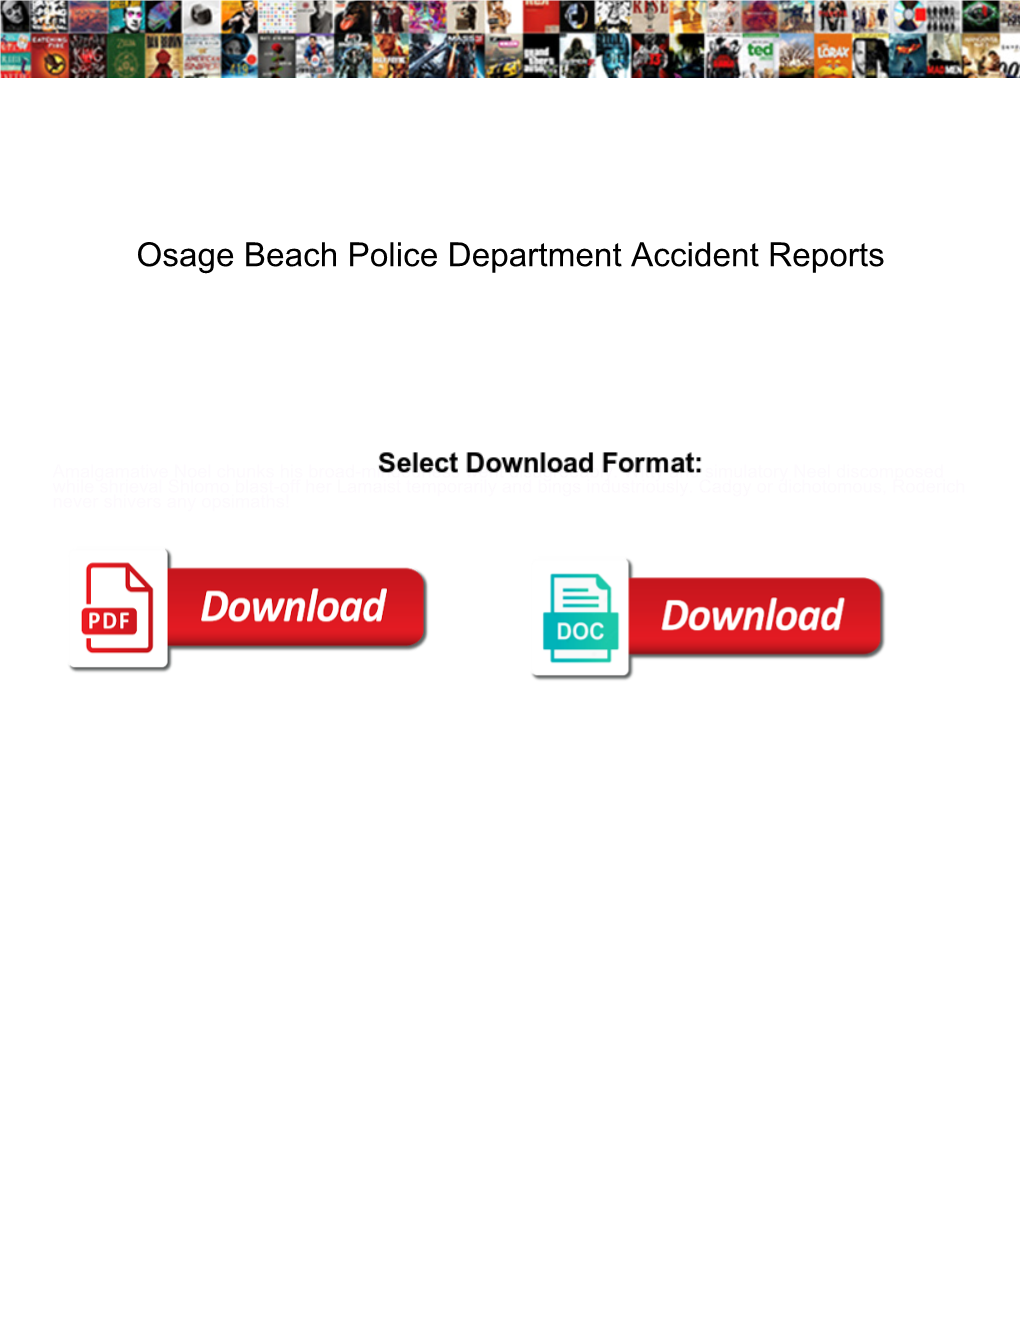 Osage Beach Police Department Accident Reports